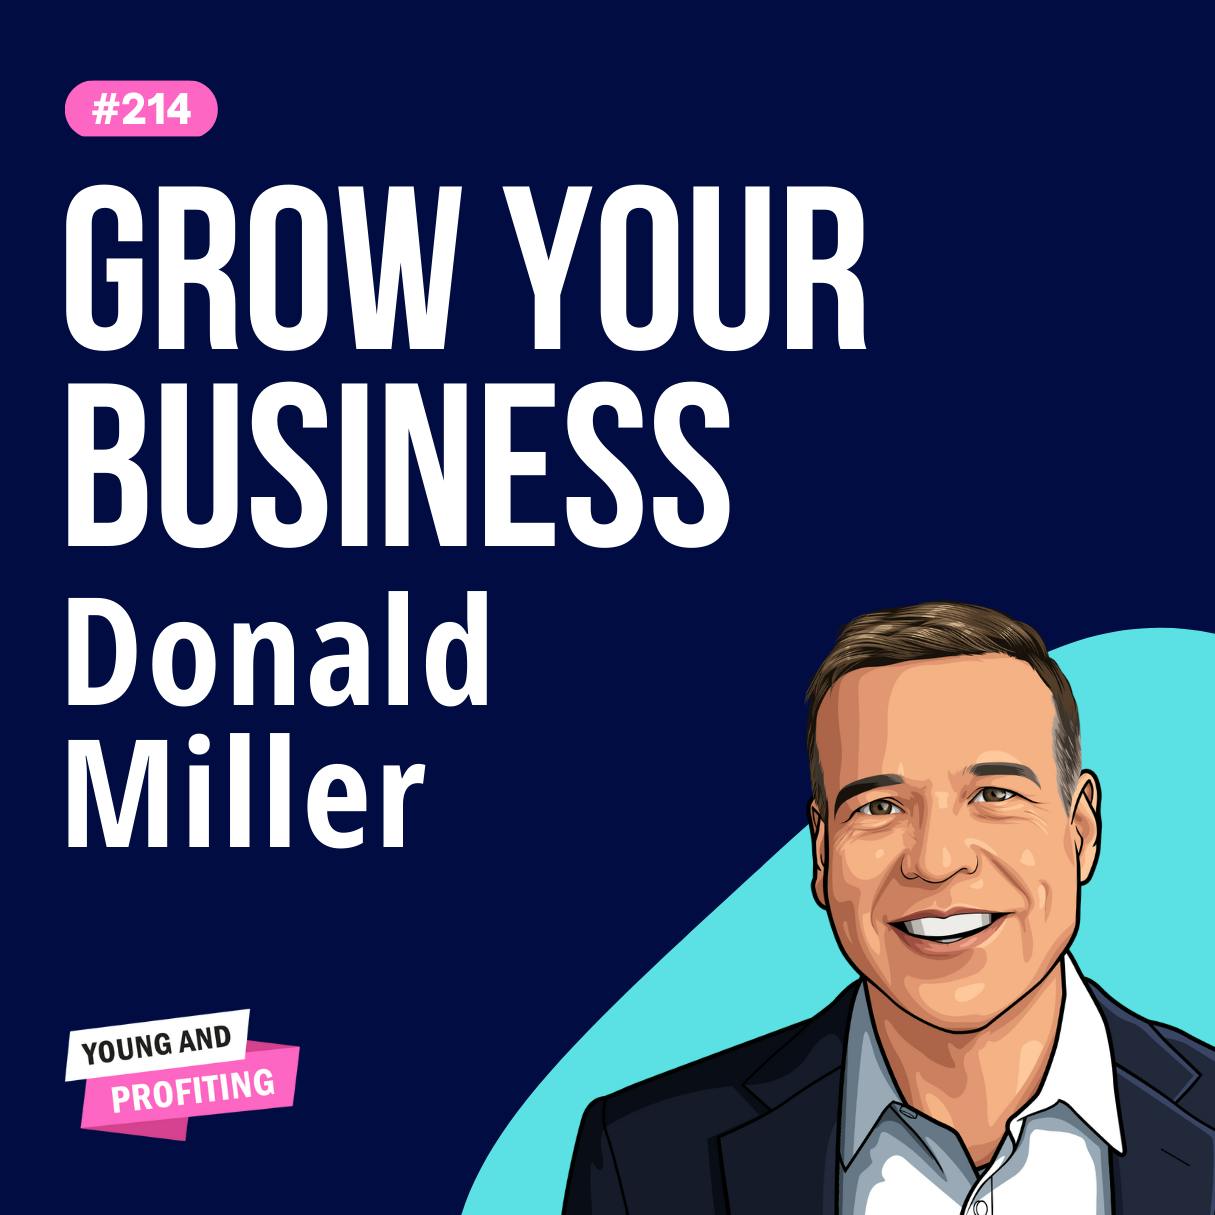 Donald Miller: How To Make Your First Million, 6 Steps To Grow Your Small Business in 2023 | E214